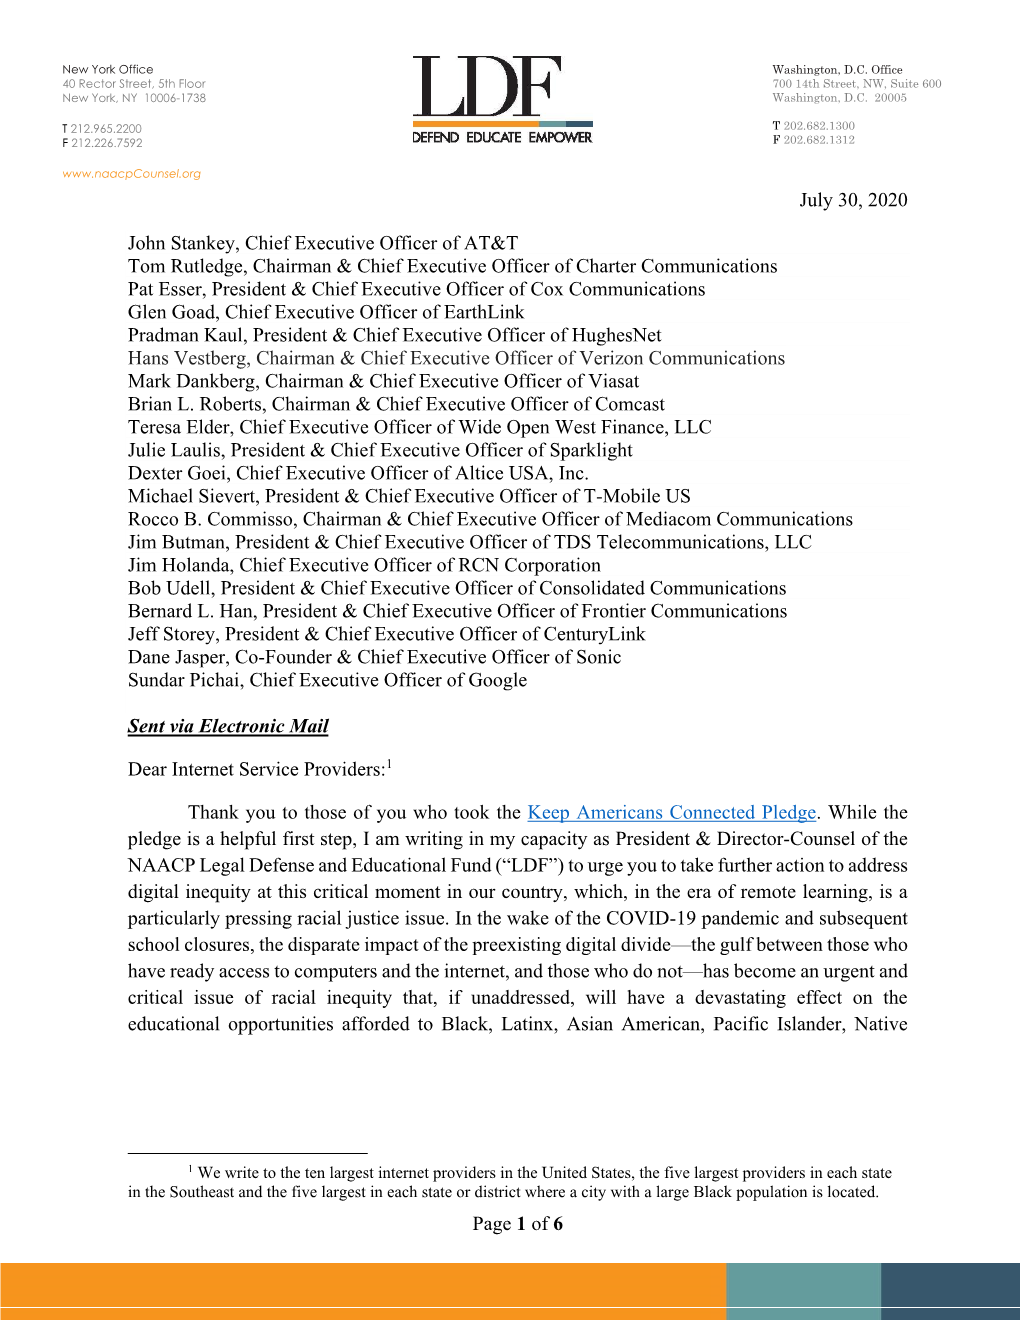 Page 1 of 6 July 30, 2020 John Stankey, Chief Executive Officer Of